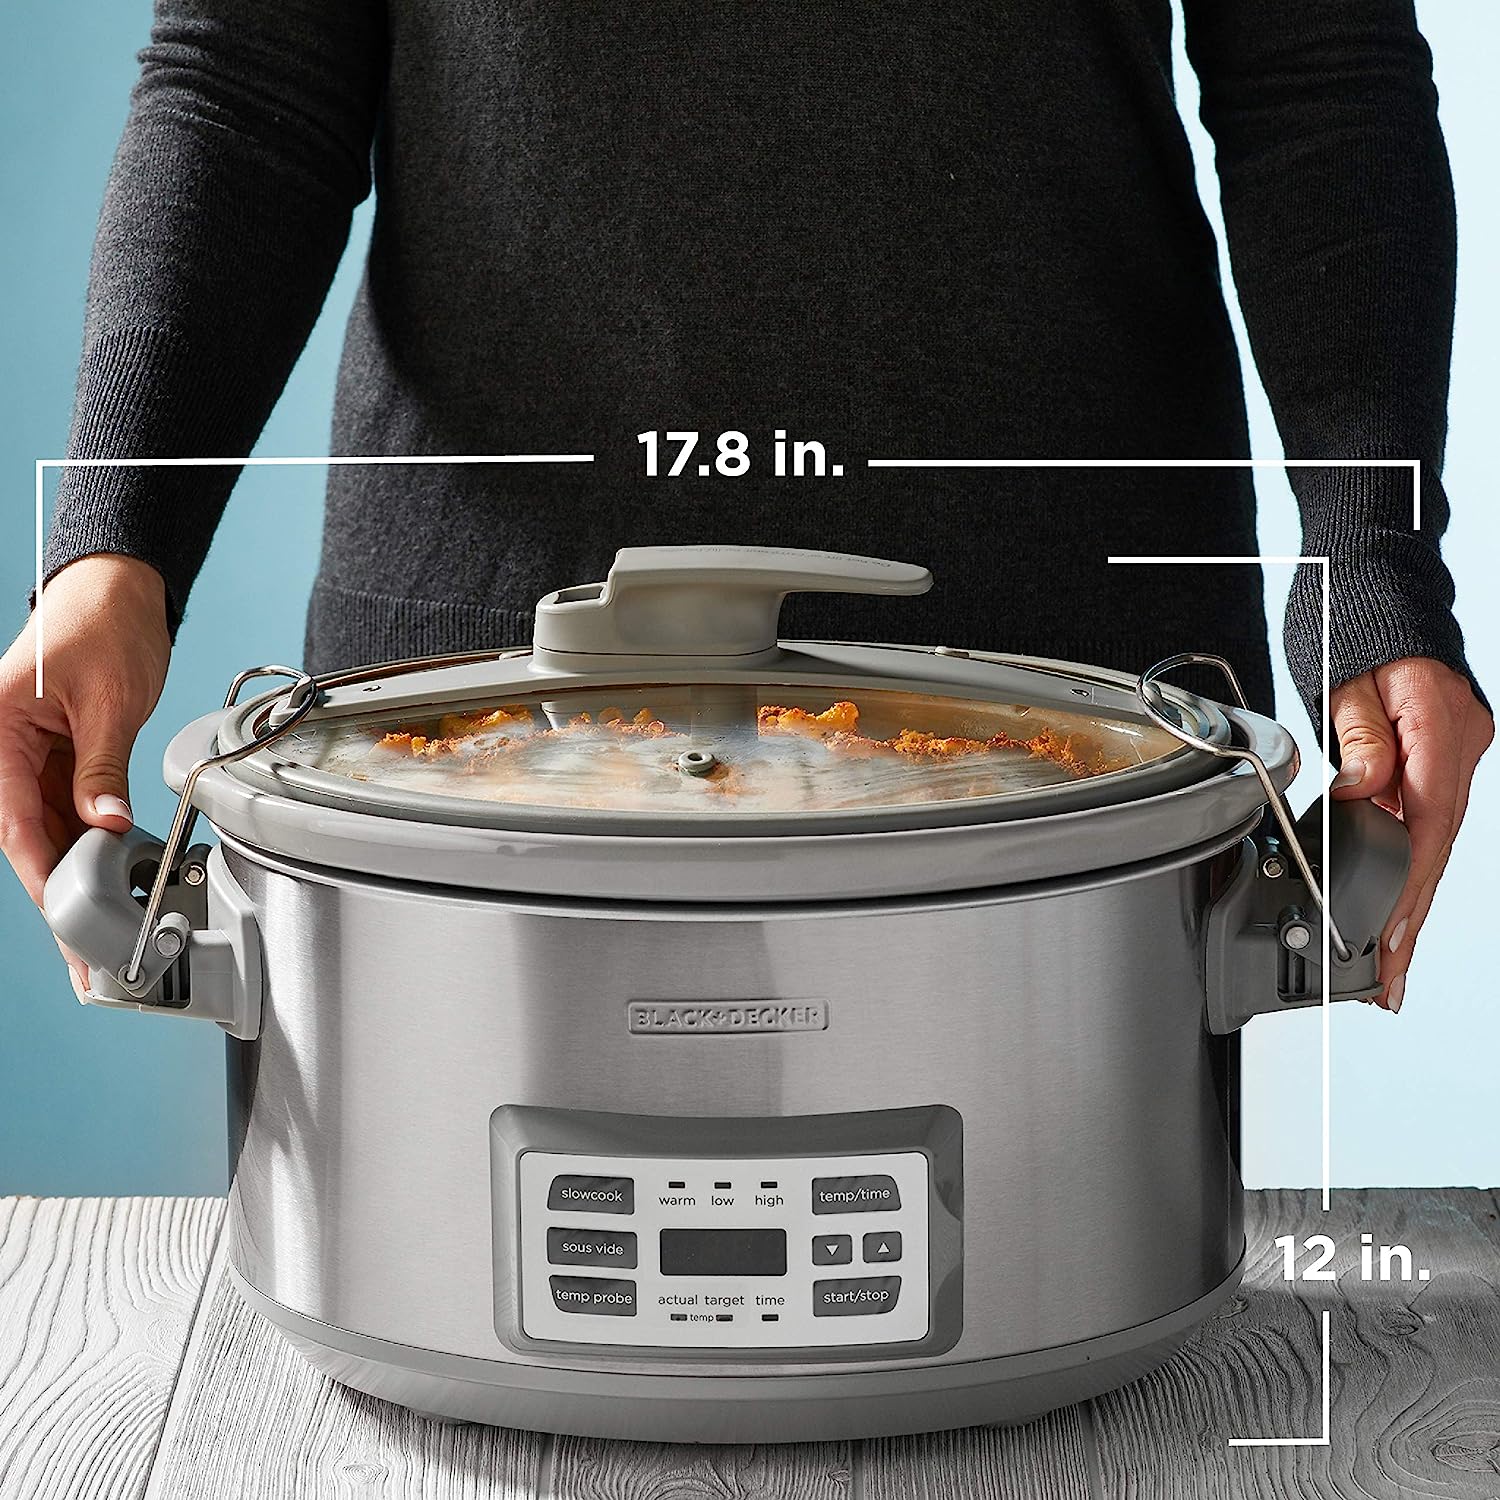 https://bigbigmart.com/wp-content/uploads/2023/07/BLACKDECKER-SCD7007SSD-Digital-Slow-Cooker-with-Temperature-Probe-Precision-Sous-Vide-7-Quart-Capacity-Stainless-Steel7.jpg